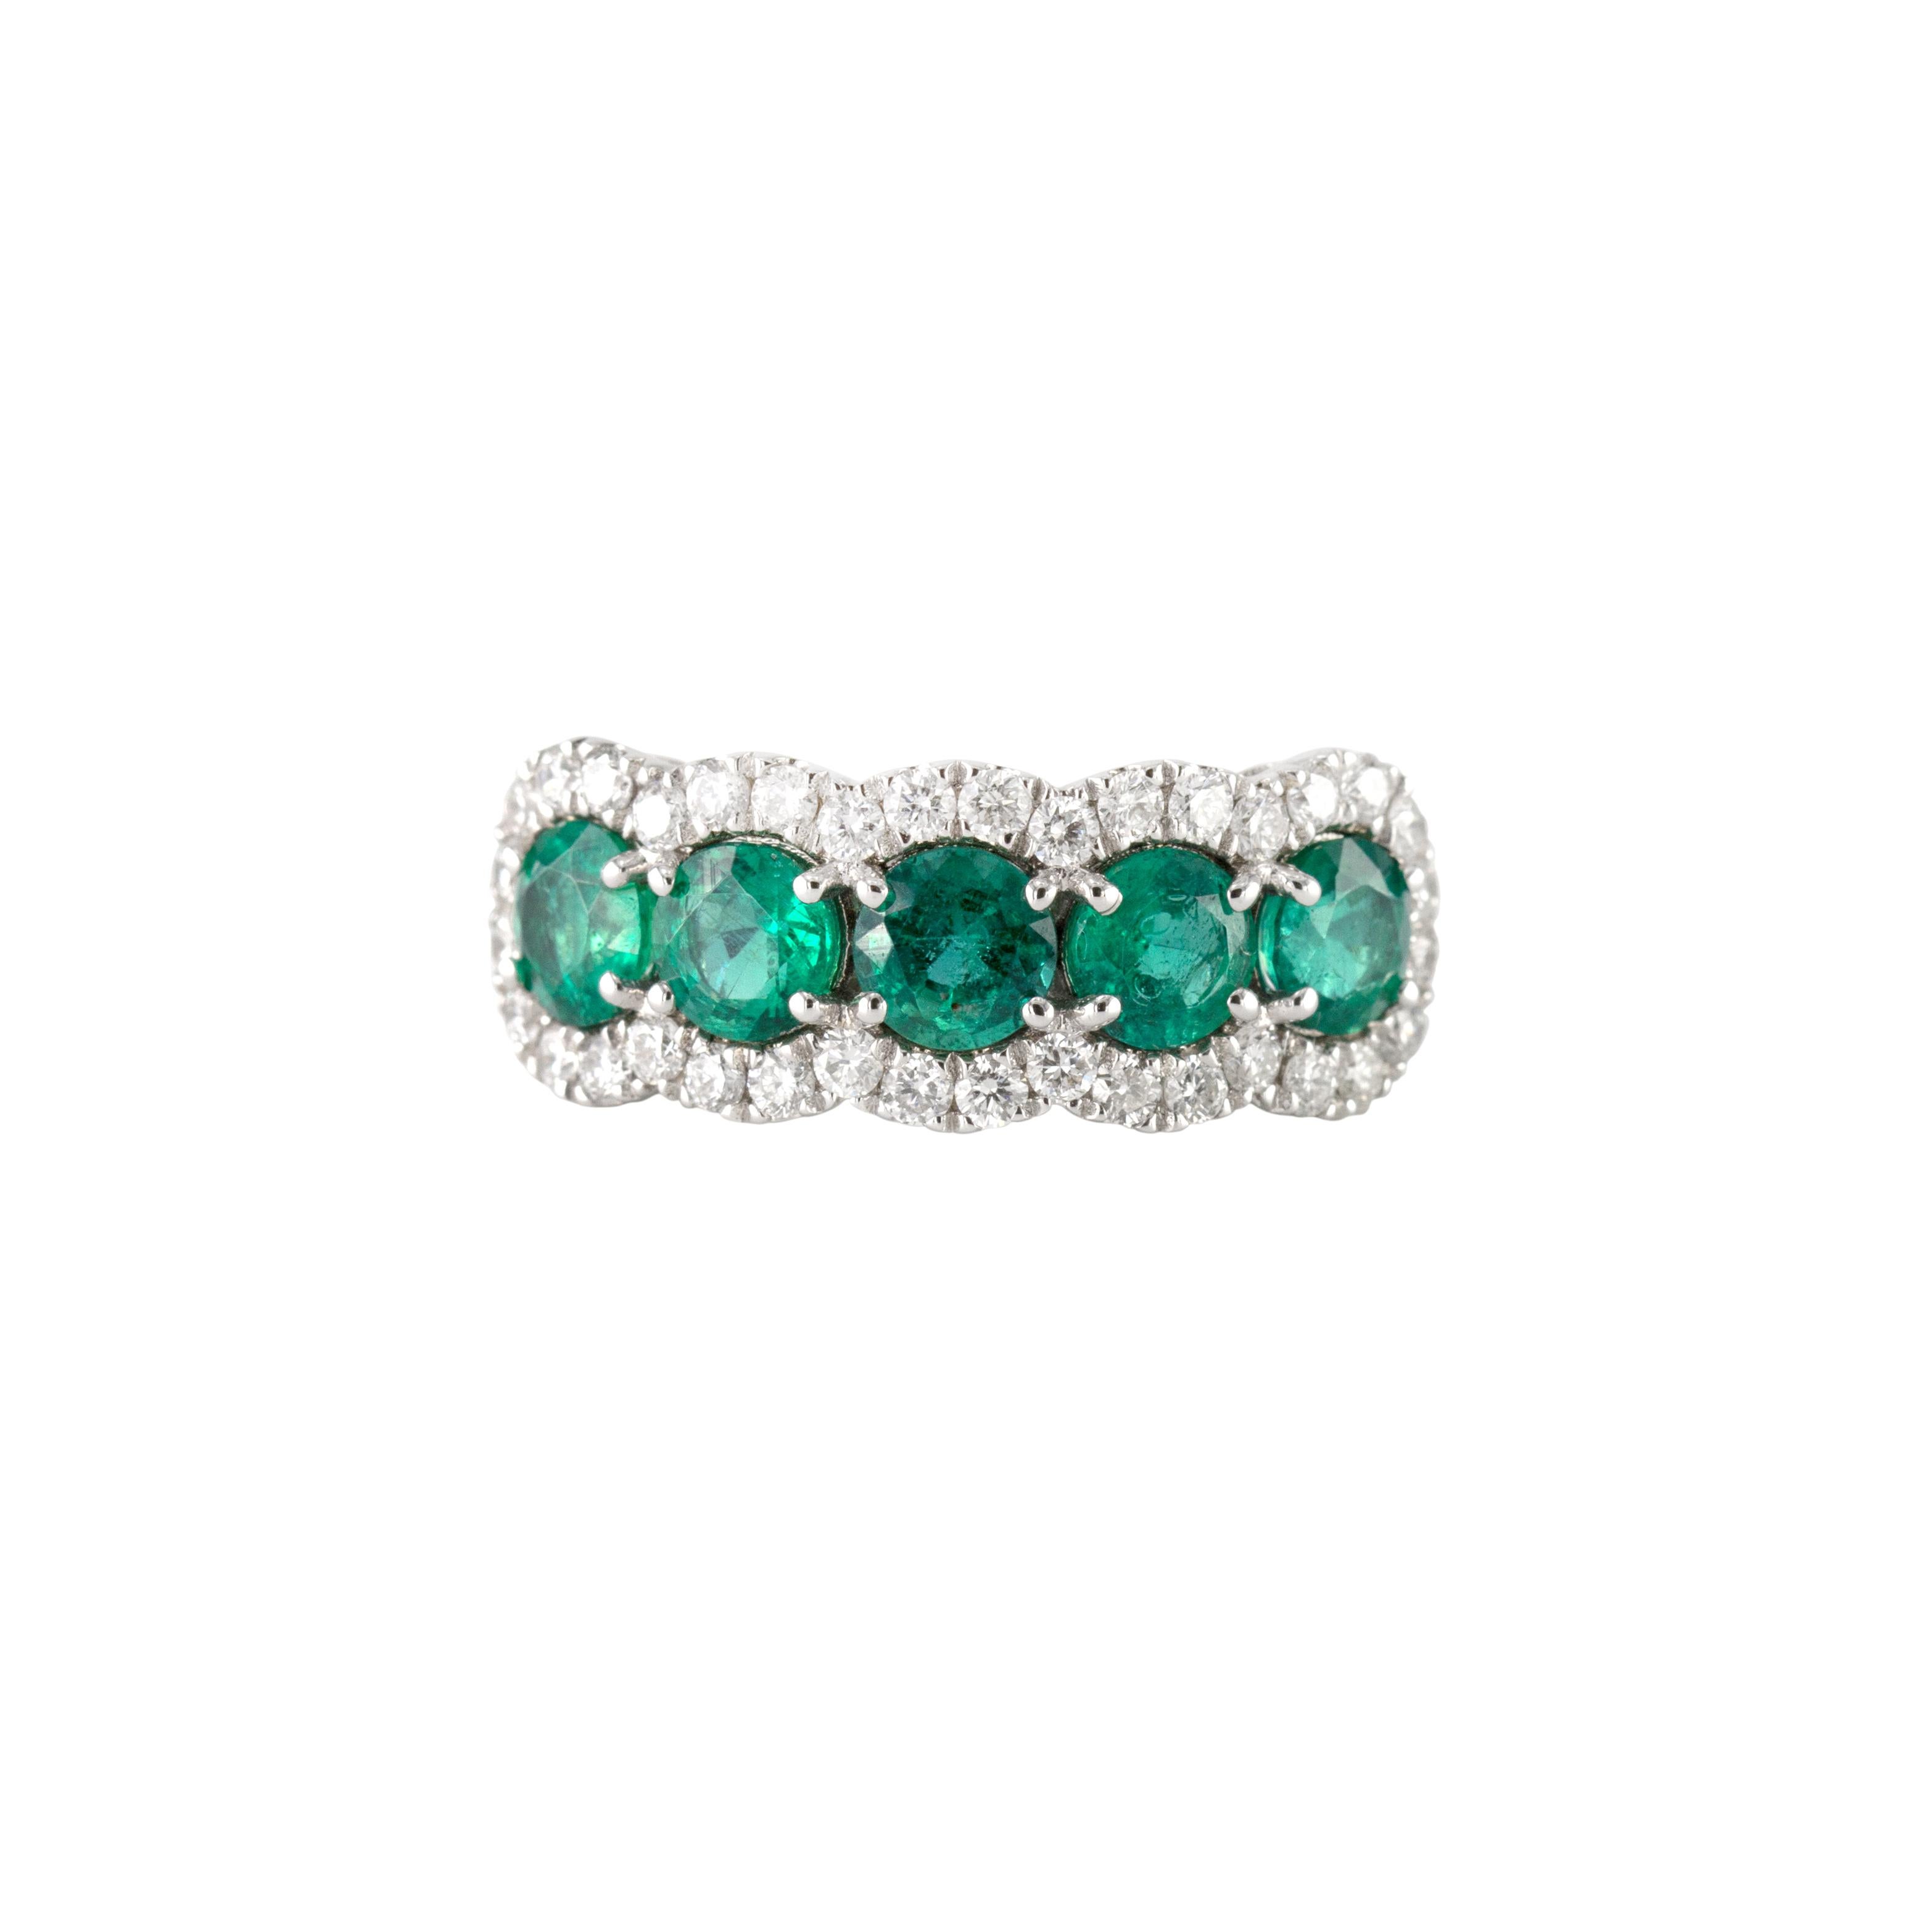 Contemporary 1.79 Carat Emerald Ring with 0.55 Carats Diamond in 18k White Gold ref1505 For Sale